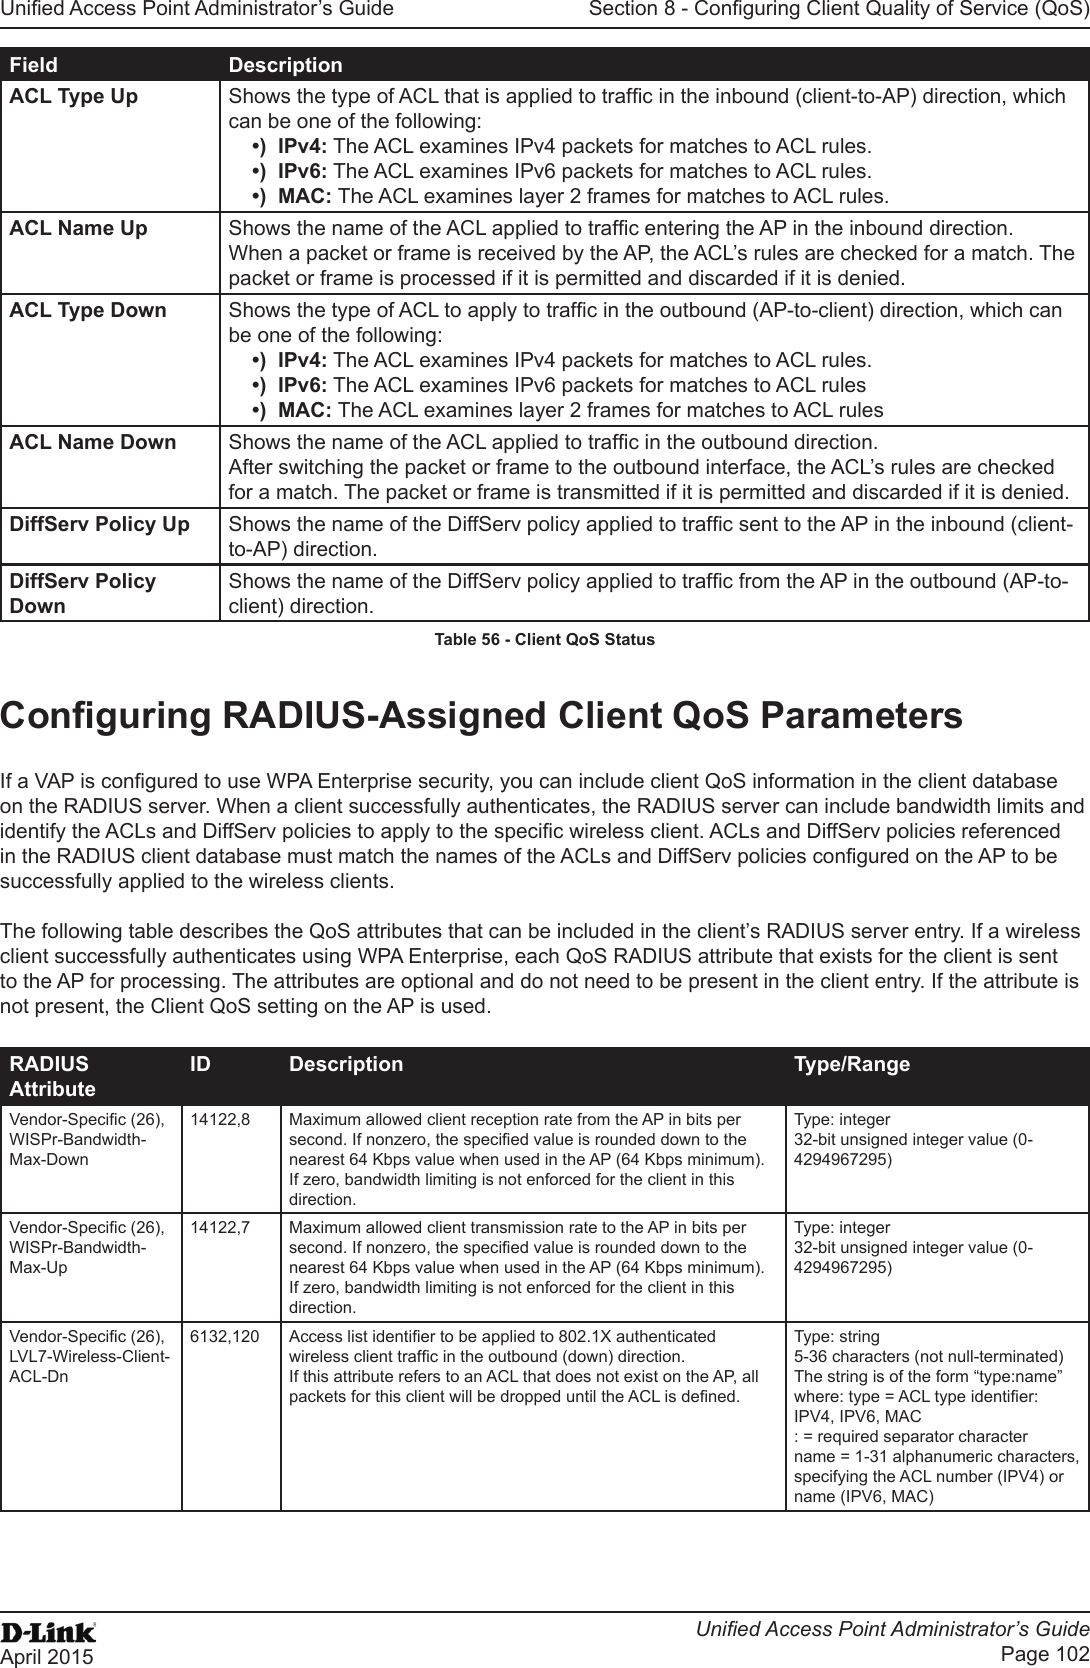 Unied Access Point Administrator’s GuideUnied Access Point Administrator’s GuidePage 102April 2015Section 8 - Conguring Client Quality of Service (QoS)Field DescriptionACL Type Up Shows the type of ACL that is applied to trafc in the inbound (client-to-AP) direction, which can be one of the following: •)  IPv4: The ACL examines IPv4 packets for matches to ACL rules.•)  IPv6: The ACL examines IPv6 packets for matches to ACL rules.•)  MAC: The ACL examines layer 2 frames for matches to ACL rules.ACL Name Up Shows the name of the ACL applied to trafc entering the AP in the inbound direction. When a packet or frame is received by the AP, the ACL’s rules are checked for a match. The packet or frame is processed if it is permitted and discarded if it is denied.ACL Type Down Shows the type of ACL to apply to trafc in the outbound (AP-to-client) direction, which can be one of the following: •)  IPv4: The ACL examines IPv4 packets for matches to ACL rules.•)  IPv6: The ACL examines IPv6 packets for matches to ACL rules•)  MAC: The ACL examines layer 2 frames for matches to ACL rulesACL Name Down Shows the name of the ACL applied to trafc in the outbound direction. After switching the packet or frame to the outbound interface, the ACL’s rules are checked for a match. The packet or frame is transmitted if it is permitted and discarded if it is denied.DiffServ Policy Up Shows the name of the DiffServ policy applied to trafc sent to the AP in the inbound (client-to-AP) direction.DiffServ Policy DownShows the name of the DiffServ policy applied to trafc from the AP in the outbound (AP-to-client) direction.Table 56 - Client QoS StatusConguring RADIUS-Assigned Client QoS ParametersIf a VAP is congured to use WPA Enterprise security, you can include client QoS information in the client database on the RADIUS server. When a client successfully authenticates, the RADIUS server can include bandwidth limits and identify the ACLs and DiffServ policies to apply to the specic wireless client. ACLs and DiffServ policies referenced in the RADIUS client database must match the names of the ACLs and DiffServ policies congured on the AP to be successfully applied to the wireless clients.The following table describes the QoS attributes that can be included in the client’s RADIUS server entry. If a wireless client successfully authenticates using WPA Enterprise, each QoS RADIUS attribute that exists for the client is sent to the AP for processing. The attributes are optional and do not need to be present in the client entry. If the attribute is not present, the Client QoS setting on the AP is used.RADIUS AttributeID Description Type/RangeVendor-Specic (26), WISPr-Bandwidth-Max-Down14122,8 Maximum allowed client reception rate from the AP in bits per second. If nonzero, the specied value is rounded down to the nearest 64 Kbps value when used in the AP (64 Kbps minimum). If zero, bandwidth limiting is not enforced for the client in this direction.Type: integer32-bit unsigned integer value (0-4294967295)Vendor-Specic (26), WISPr-Bandwidth-Max-Up14122,7 Maximum allowed client transmission rate to the AP in bits per second. If nonzero, the specied value is rounded down to the nearest 64 Kbps value when used in the AP (64 Kbps minimum). If zero, bandwidth limiting is not enforced for the client in this direction.Type: integer32-bit unsigned integer value (0-4294967295)Vendor-Specic (26), LVL7-Wireless-Client-ACL-Dn6132,120 Access list identier to be applied to 802.1X authenticated wireless client trafc in the outbound (down) direction.If this attribute refers to an ACL that does not exist on the AP, all packets for this client will be dropped until the ACL is dened.Type: string5-36 characters (not null-terminated)The string is of the form “type:name” where: type = ACL type identier: IPV4, IPV6, MAC: = required separator charactername = 1-31 alphanumeric characters, specifying the ACL number (IPV4) or name (IPV6, MAC)